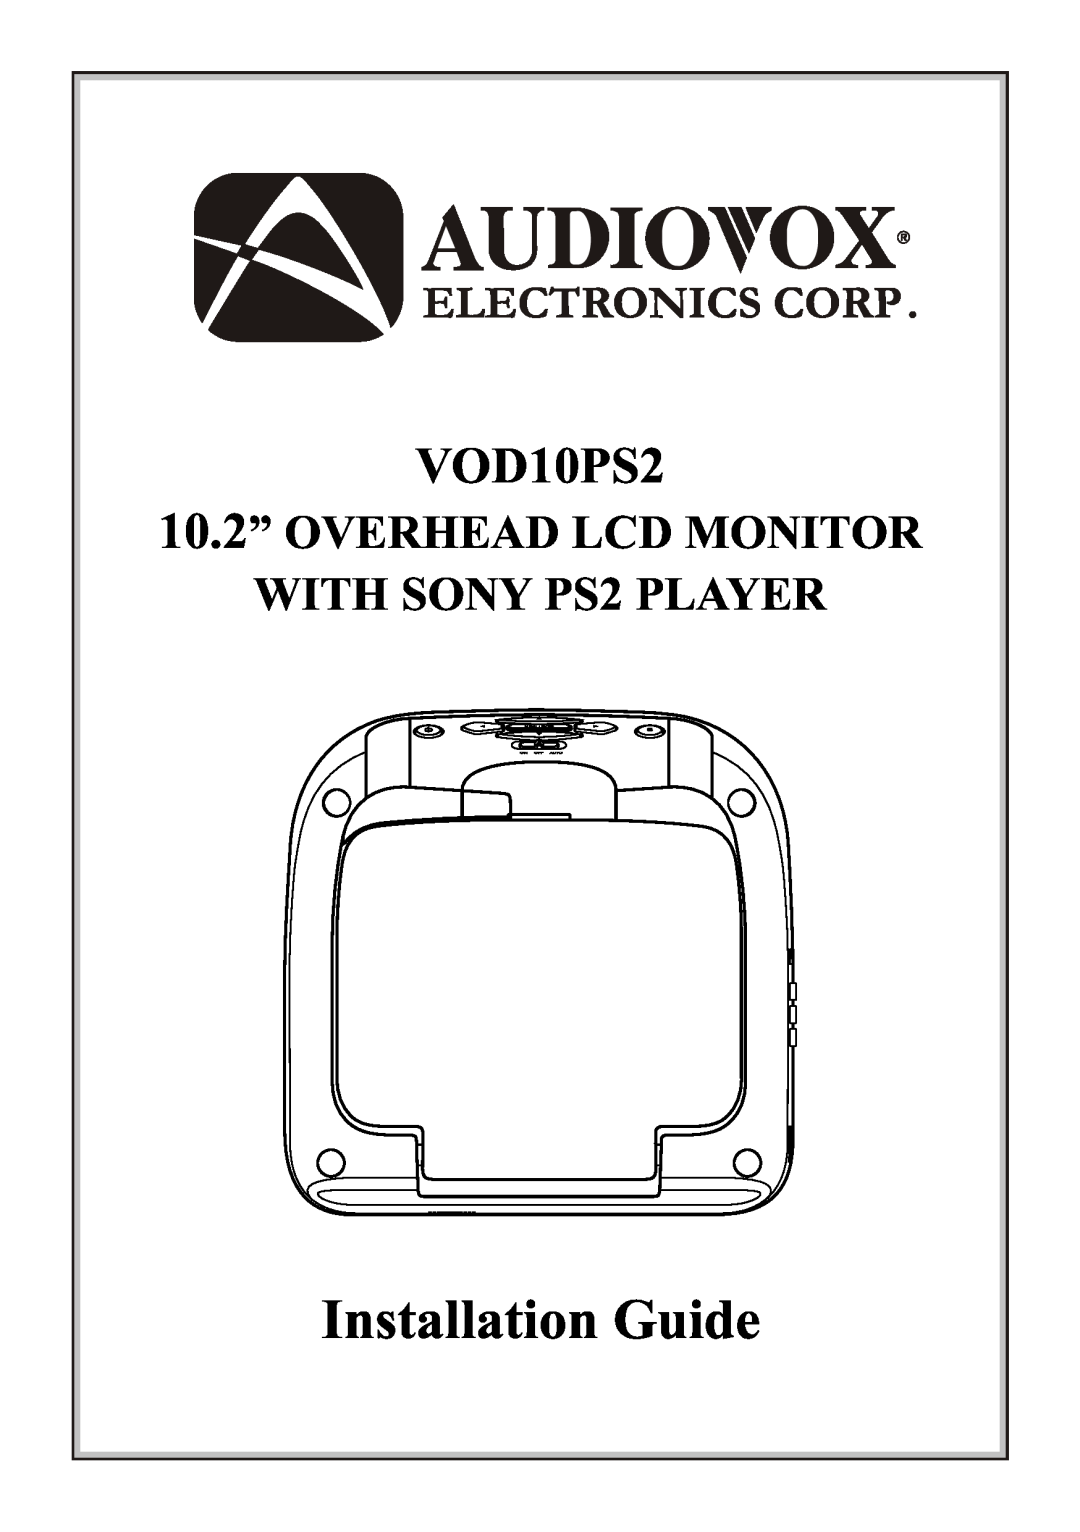 Audiovox operation manual VOD10PS2 10.2 OVERHEAD LCD MONITOR WITH SONY PS2 PLAYER, Operation Manual, Menu / Enter 